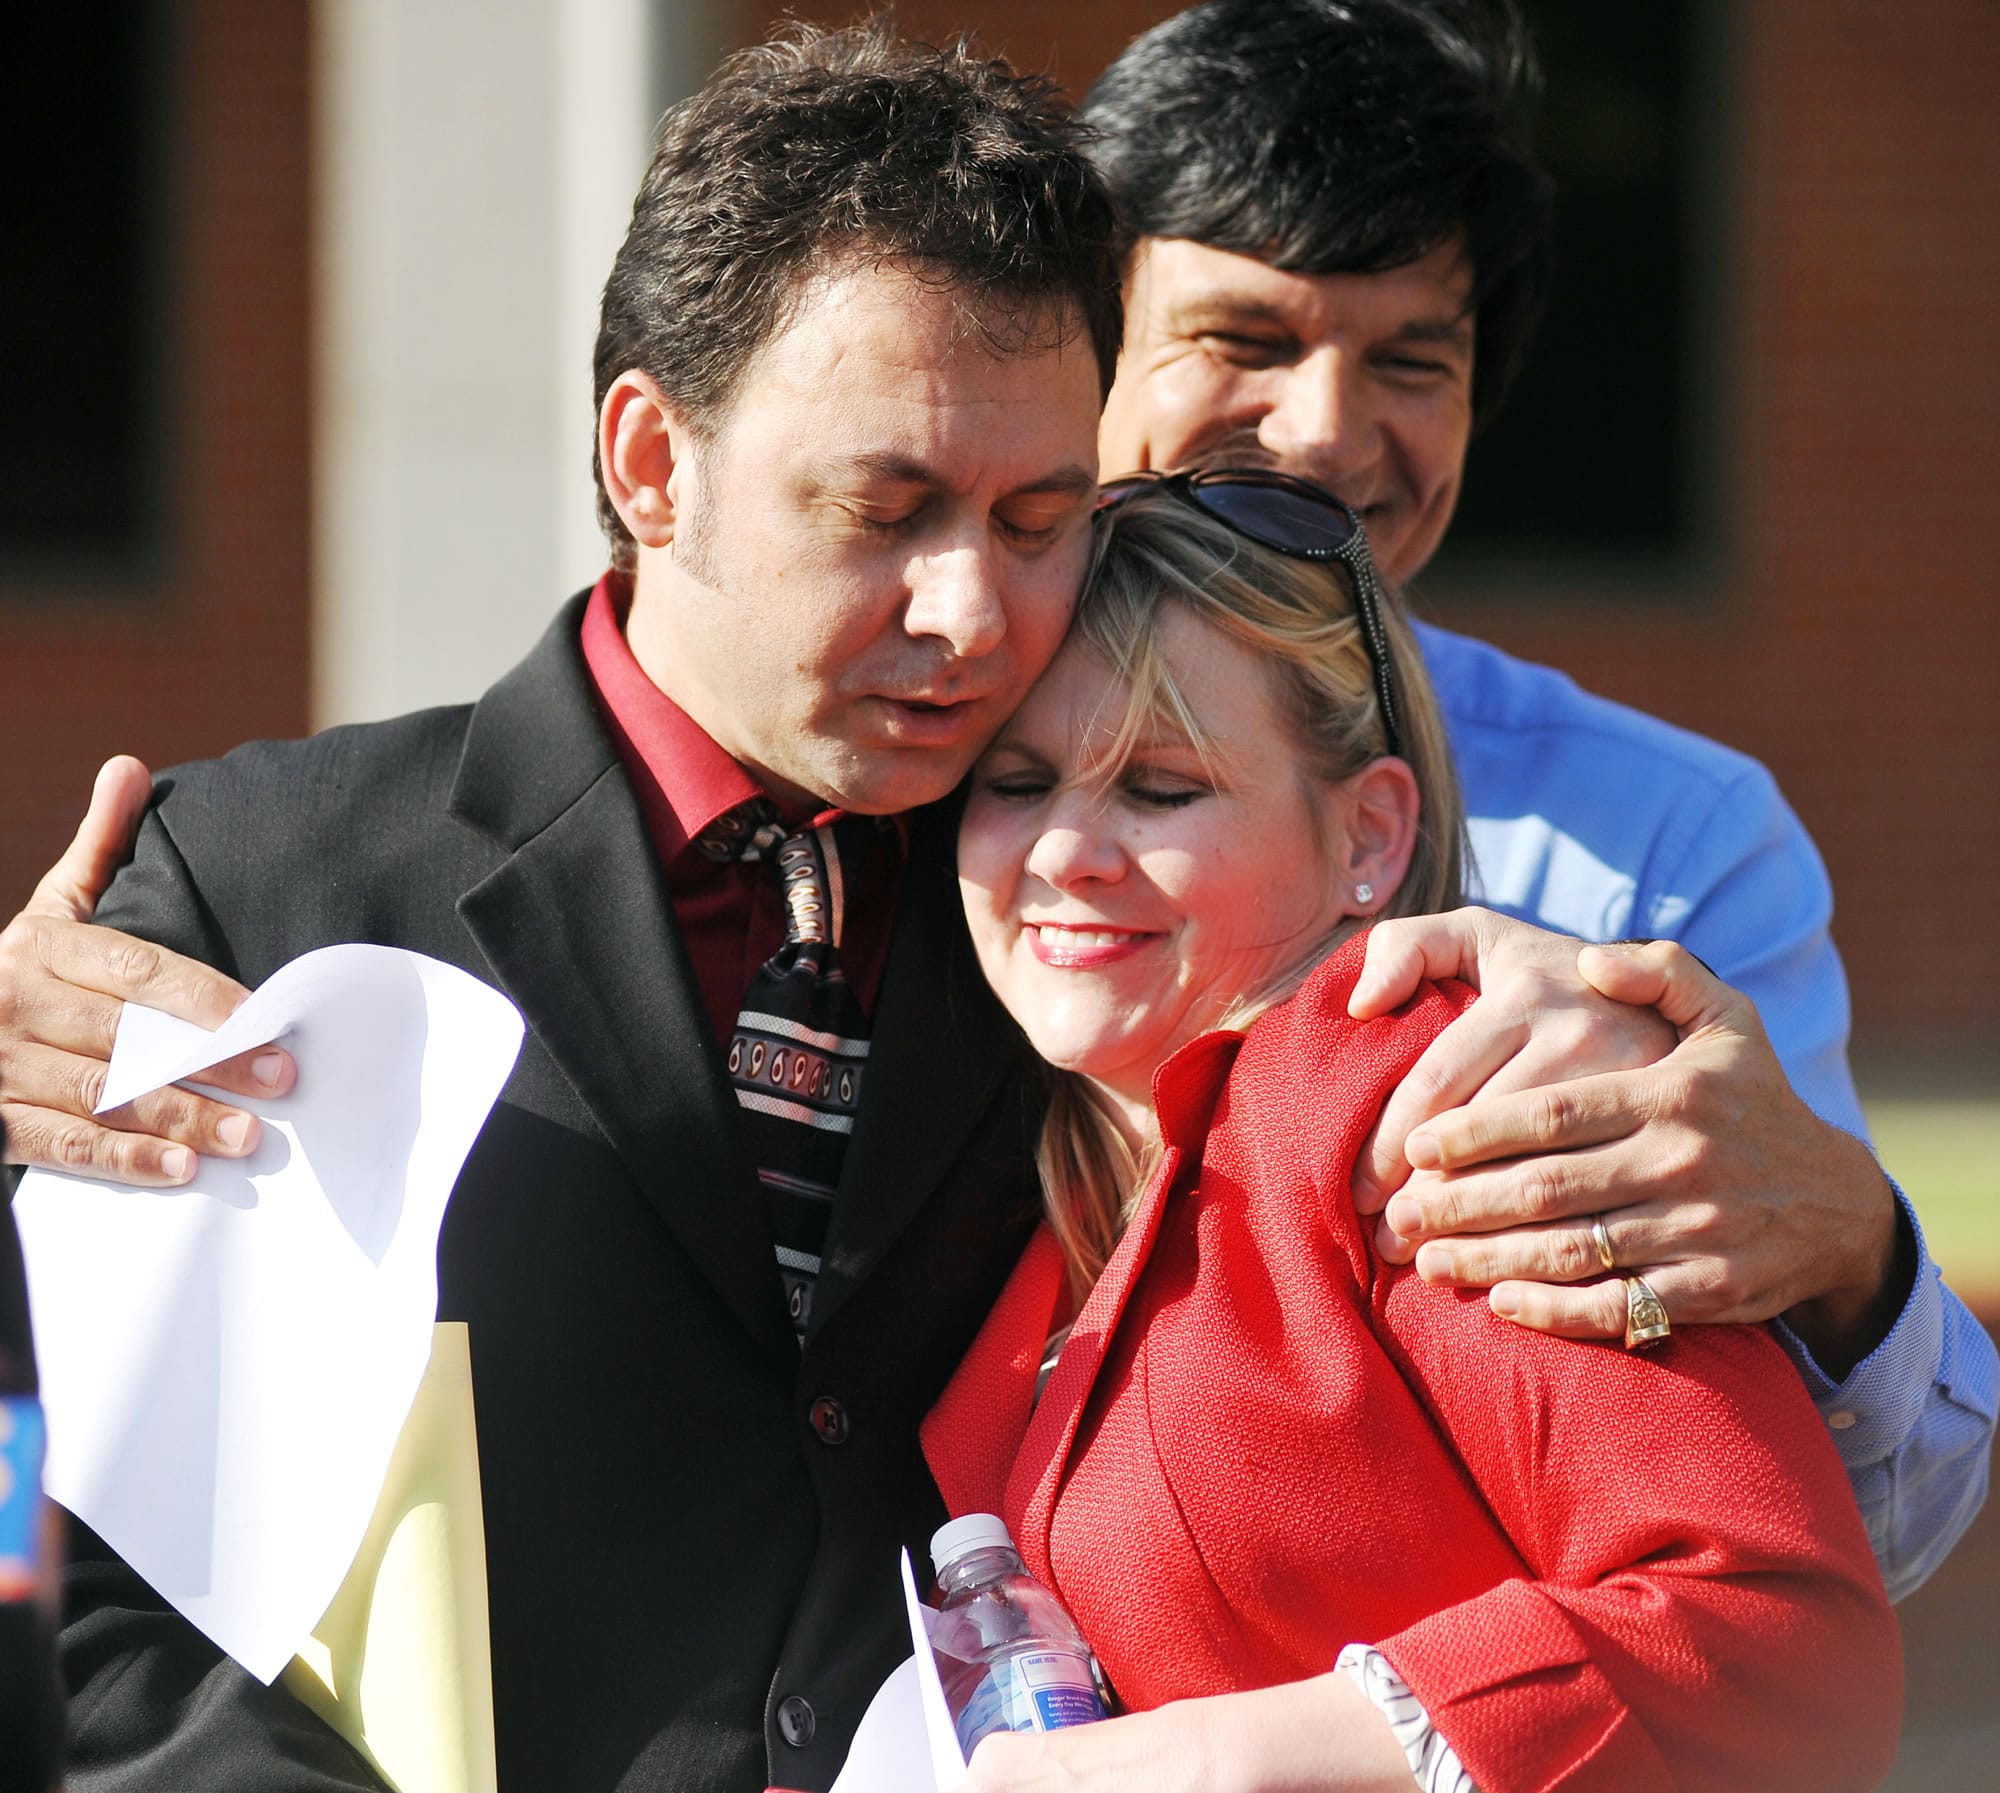 Paul Kevin Curtis, who had been in custody under suspicion of sending ricin-laced letters to President Barack Obama and others, left, hugs his attorney Christi McCoy during a news conference following his release  April 23 in Oxford, Miss.